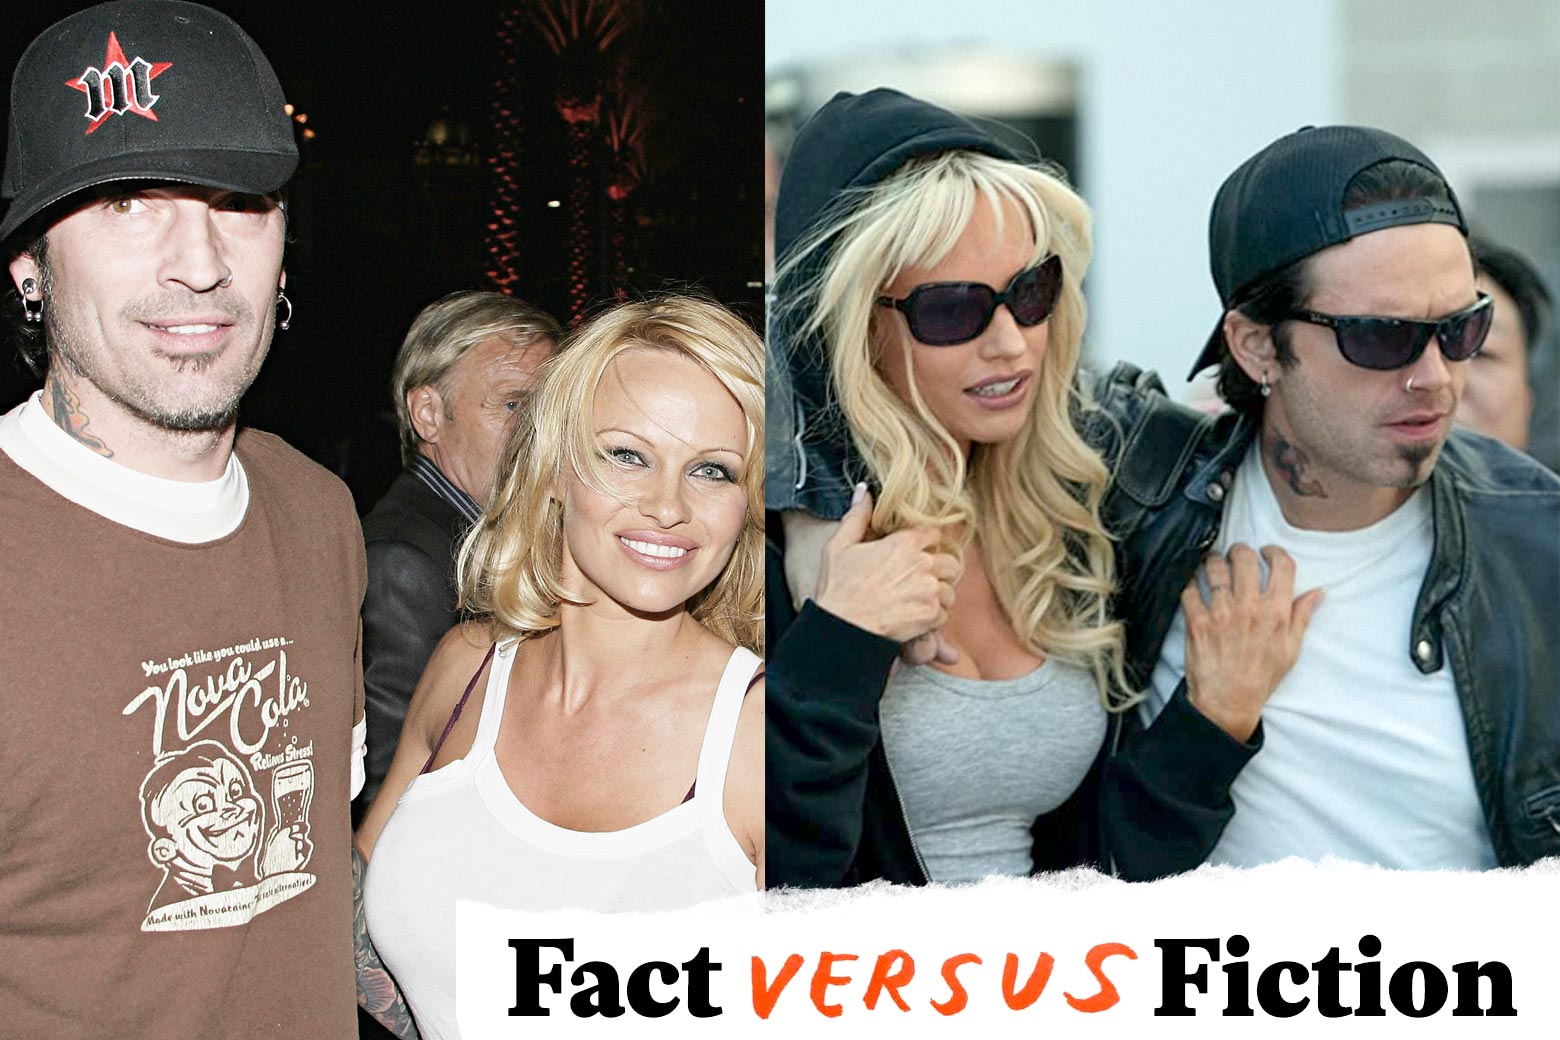 Pam and Tommy accuracy whats fact and whats fiction in the Hulu miniseries about Pamela Anderson and Tommy Lee. pic photo